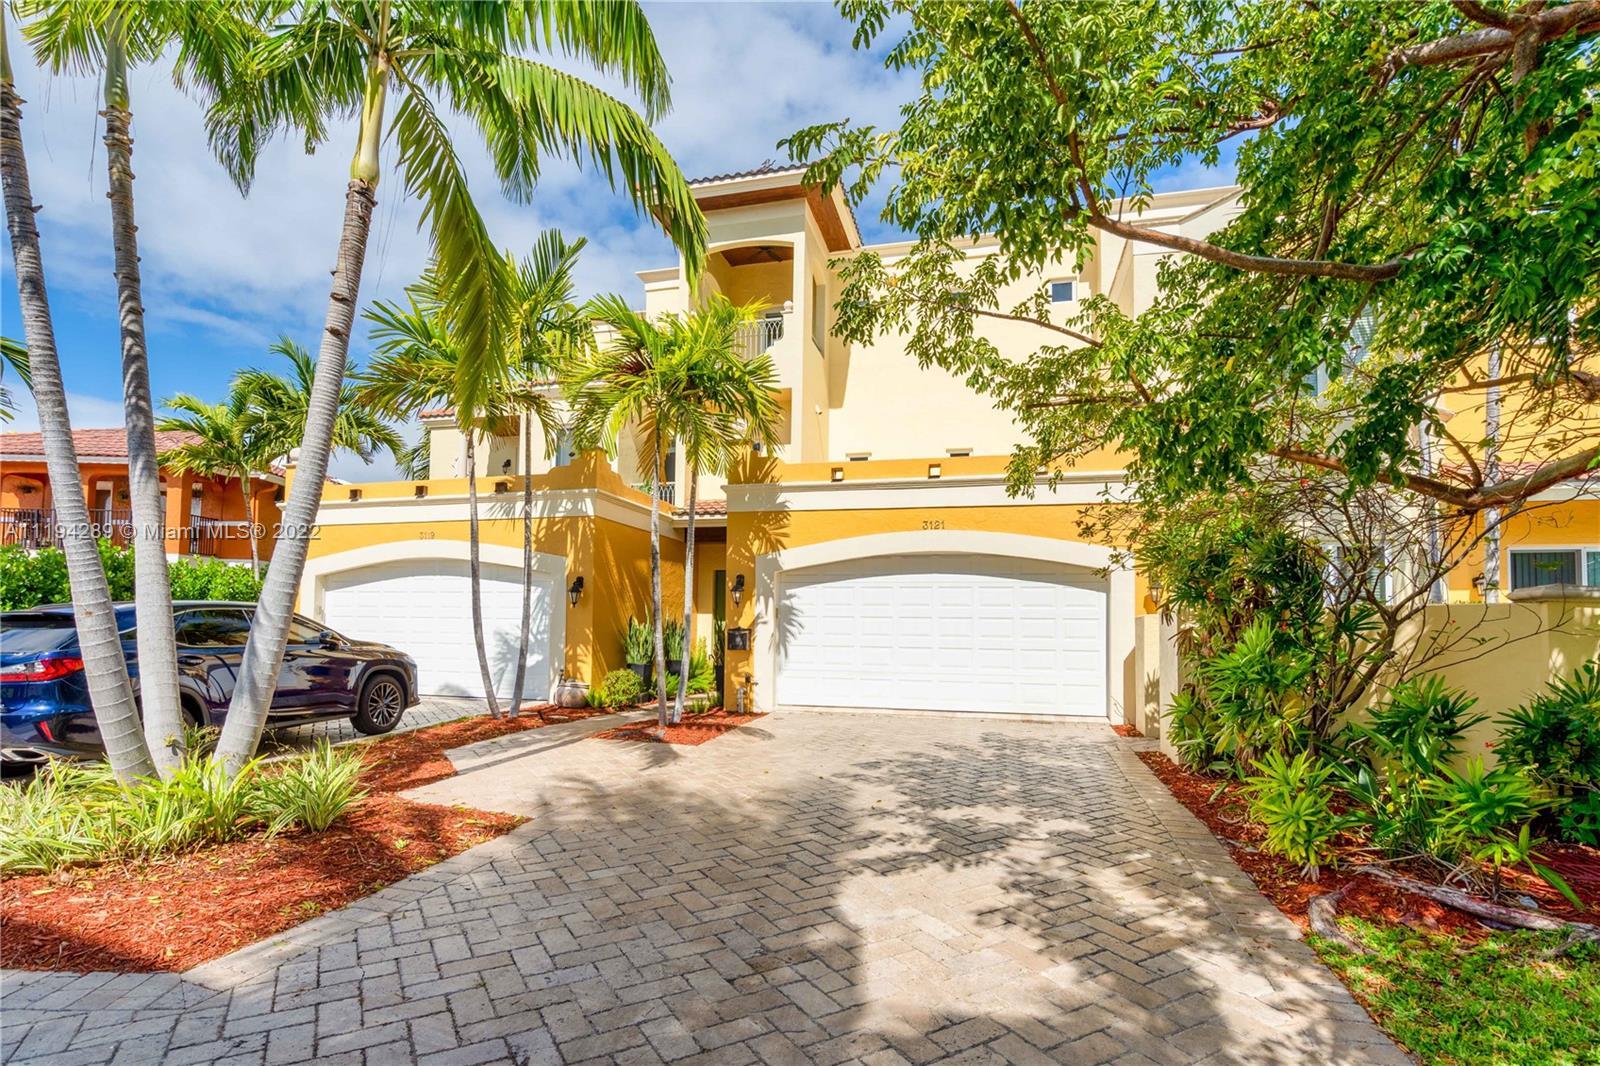 One of a kind townhome in the prestigious Dolphin Isles in east Fort Lauderdale. This 3 bedroom, 4 b